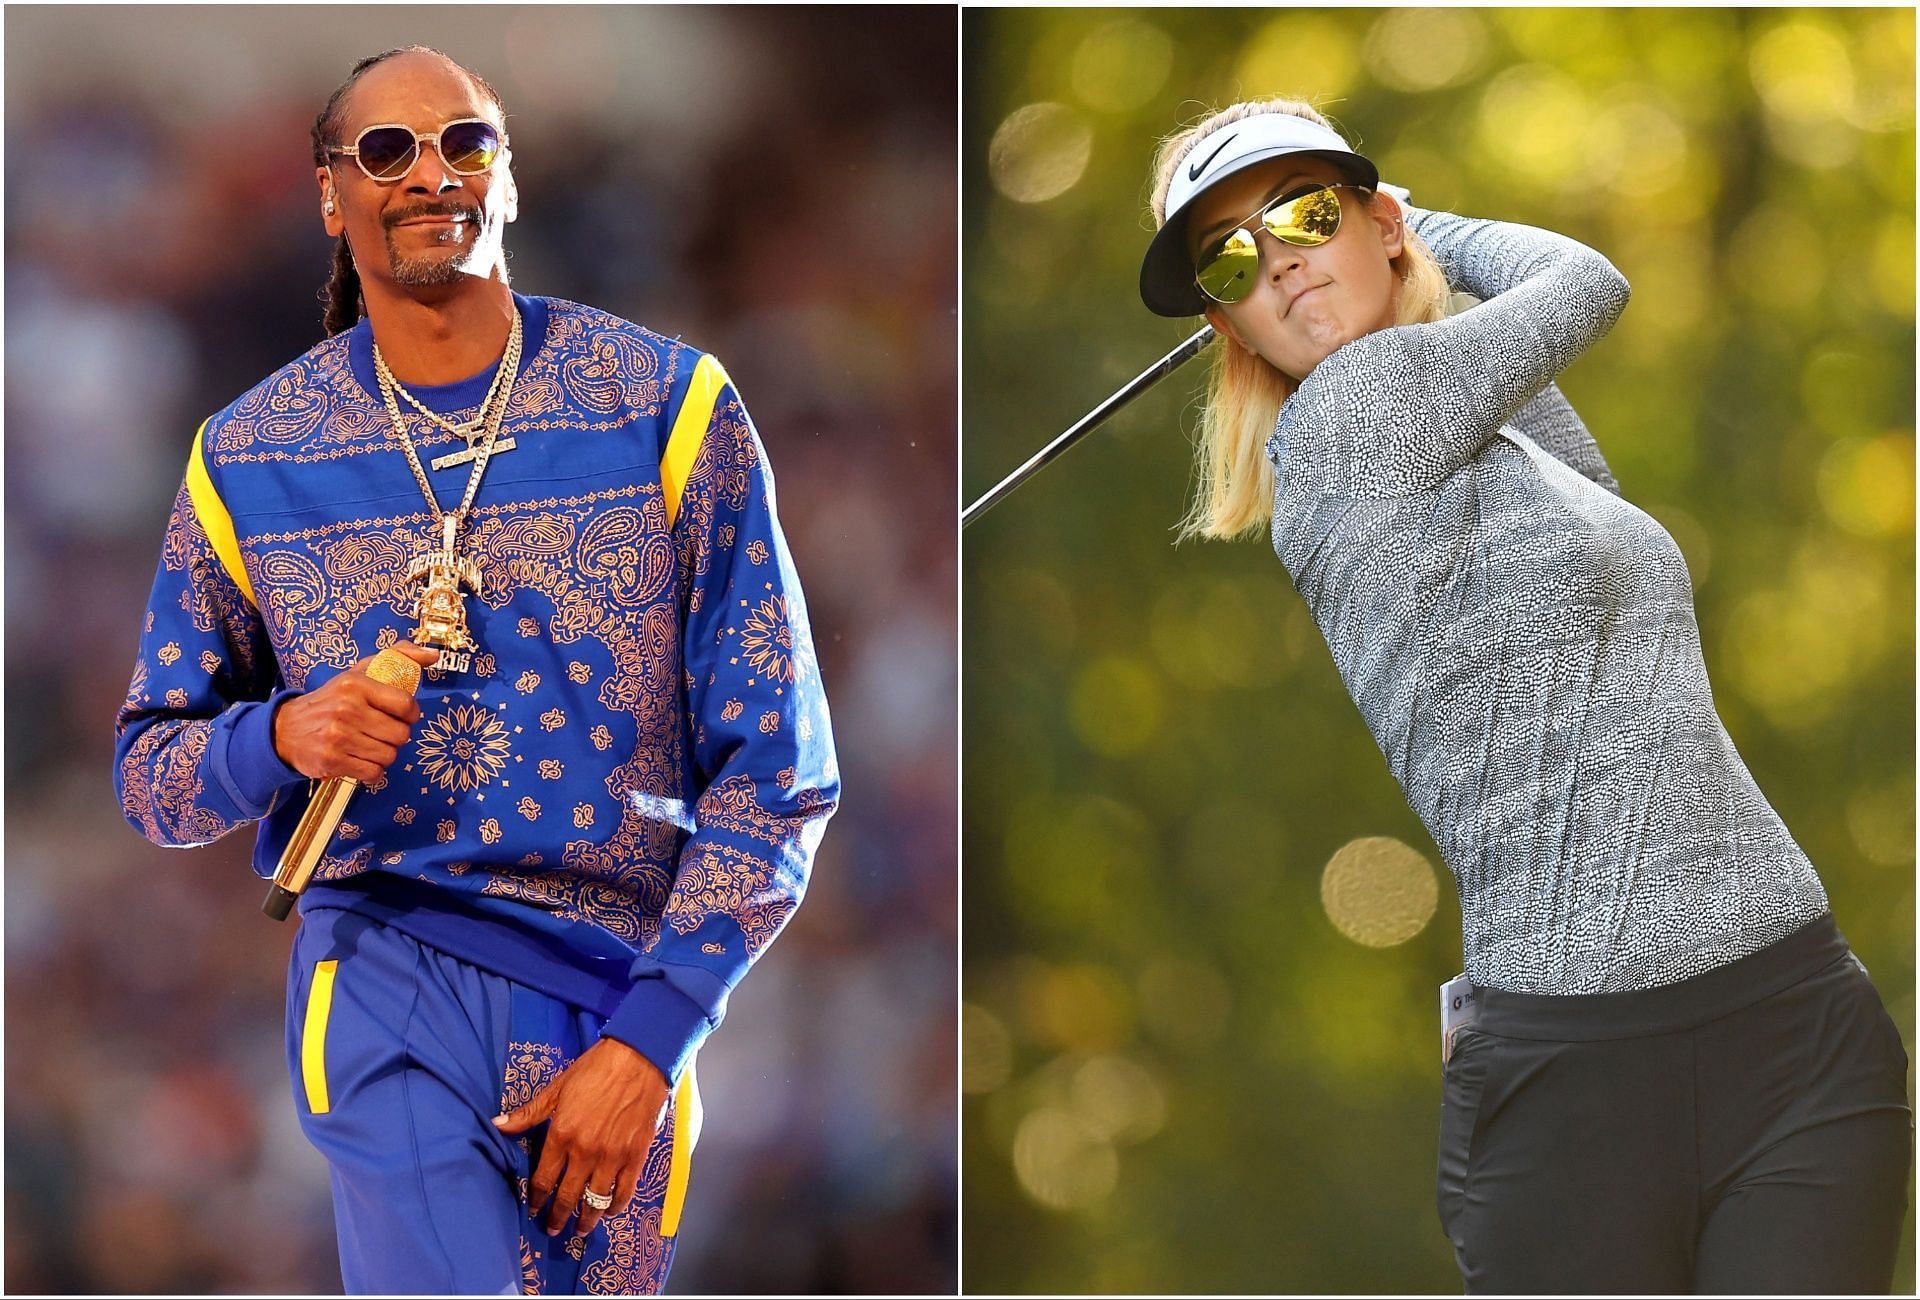 Snoop Dogg and Michelle Wie West (via Getty Images)